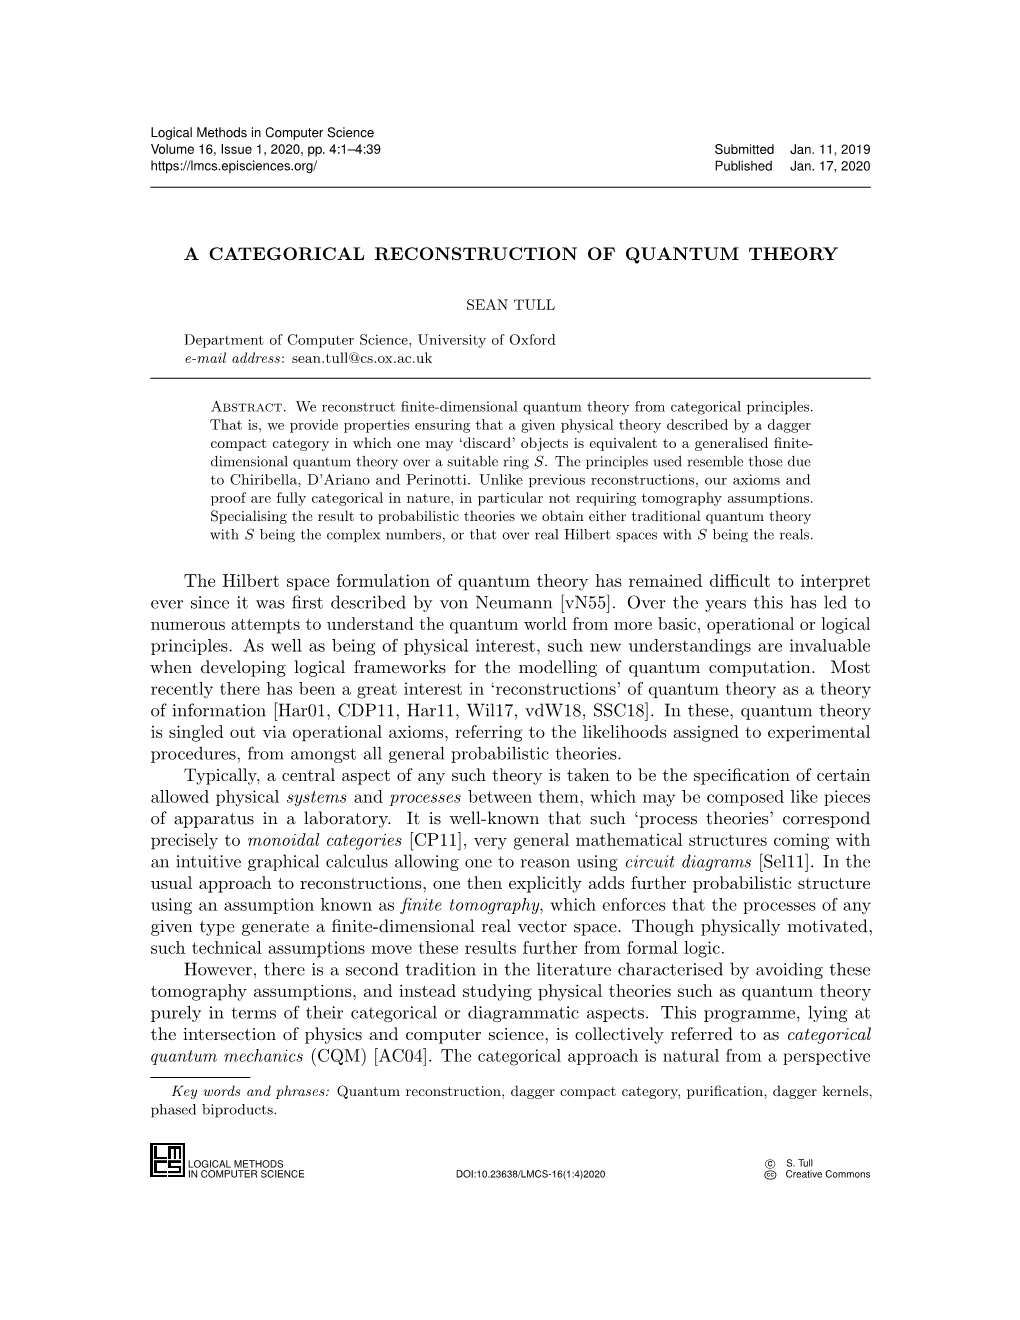 A Categorical Reconstruction of Quantum Theory